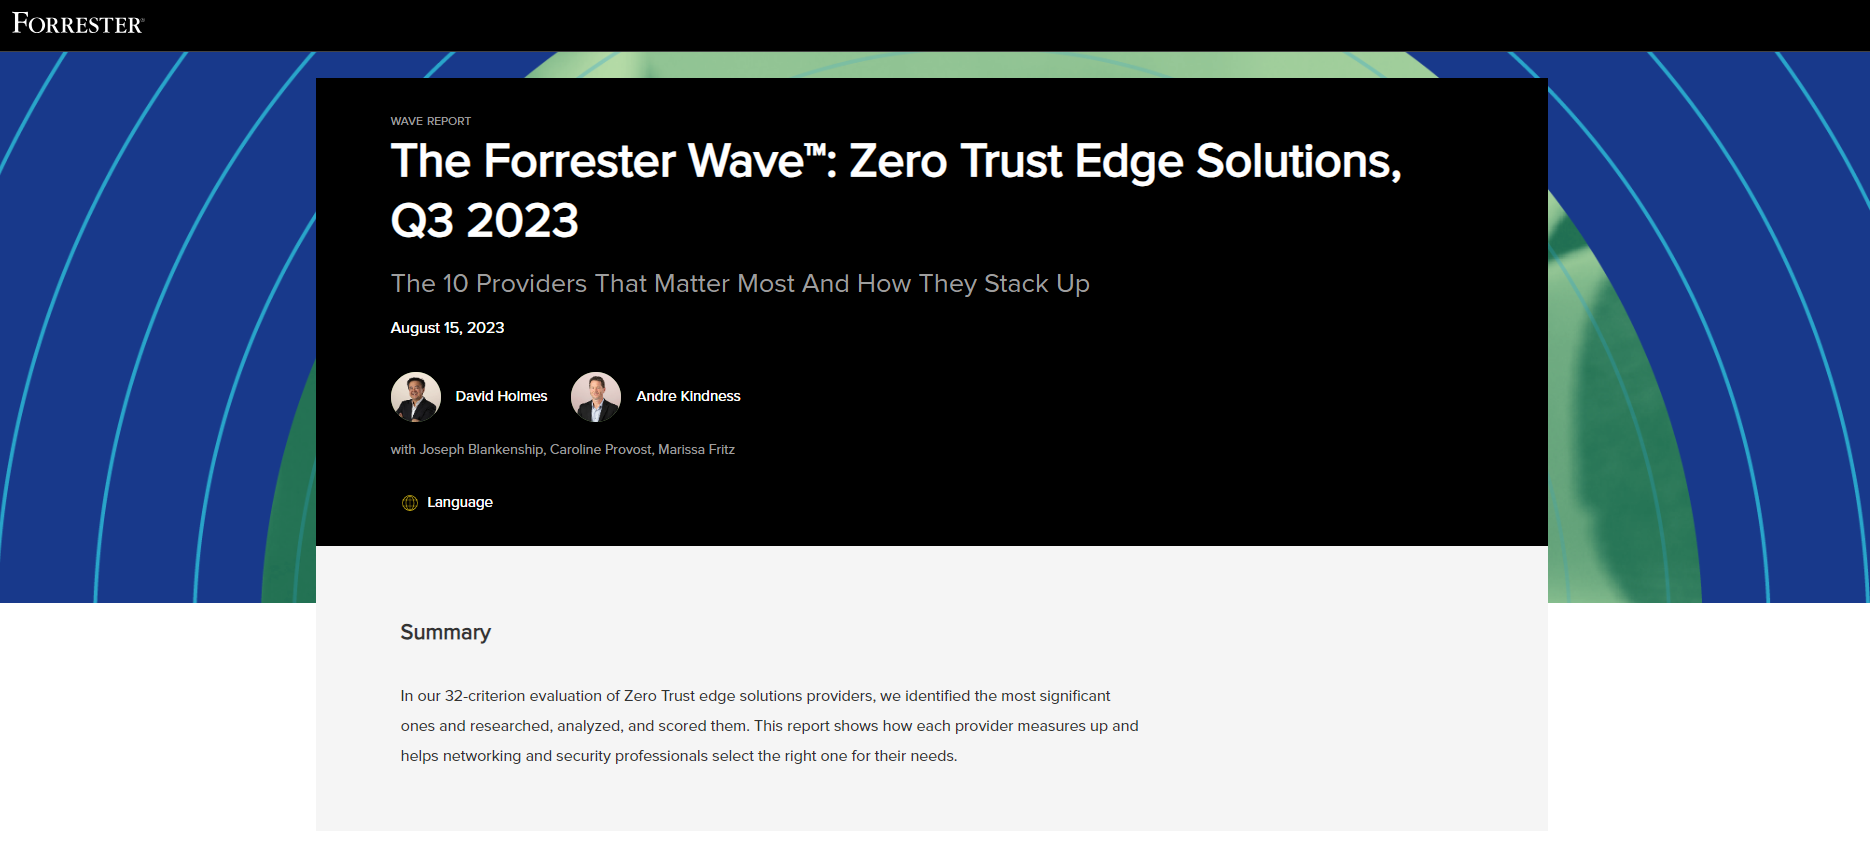 The Forrester Wave™: Zero Trust Edge Solutions, Q3 2023